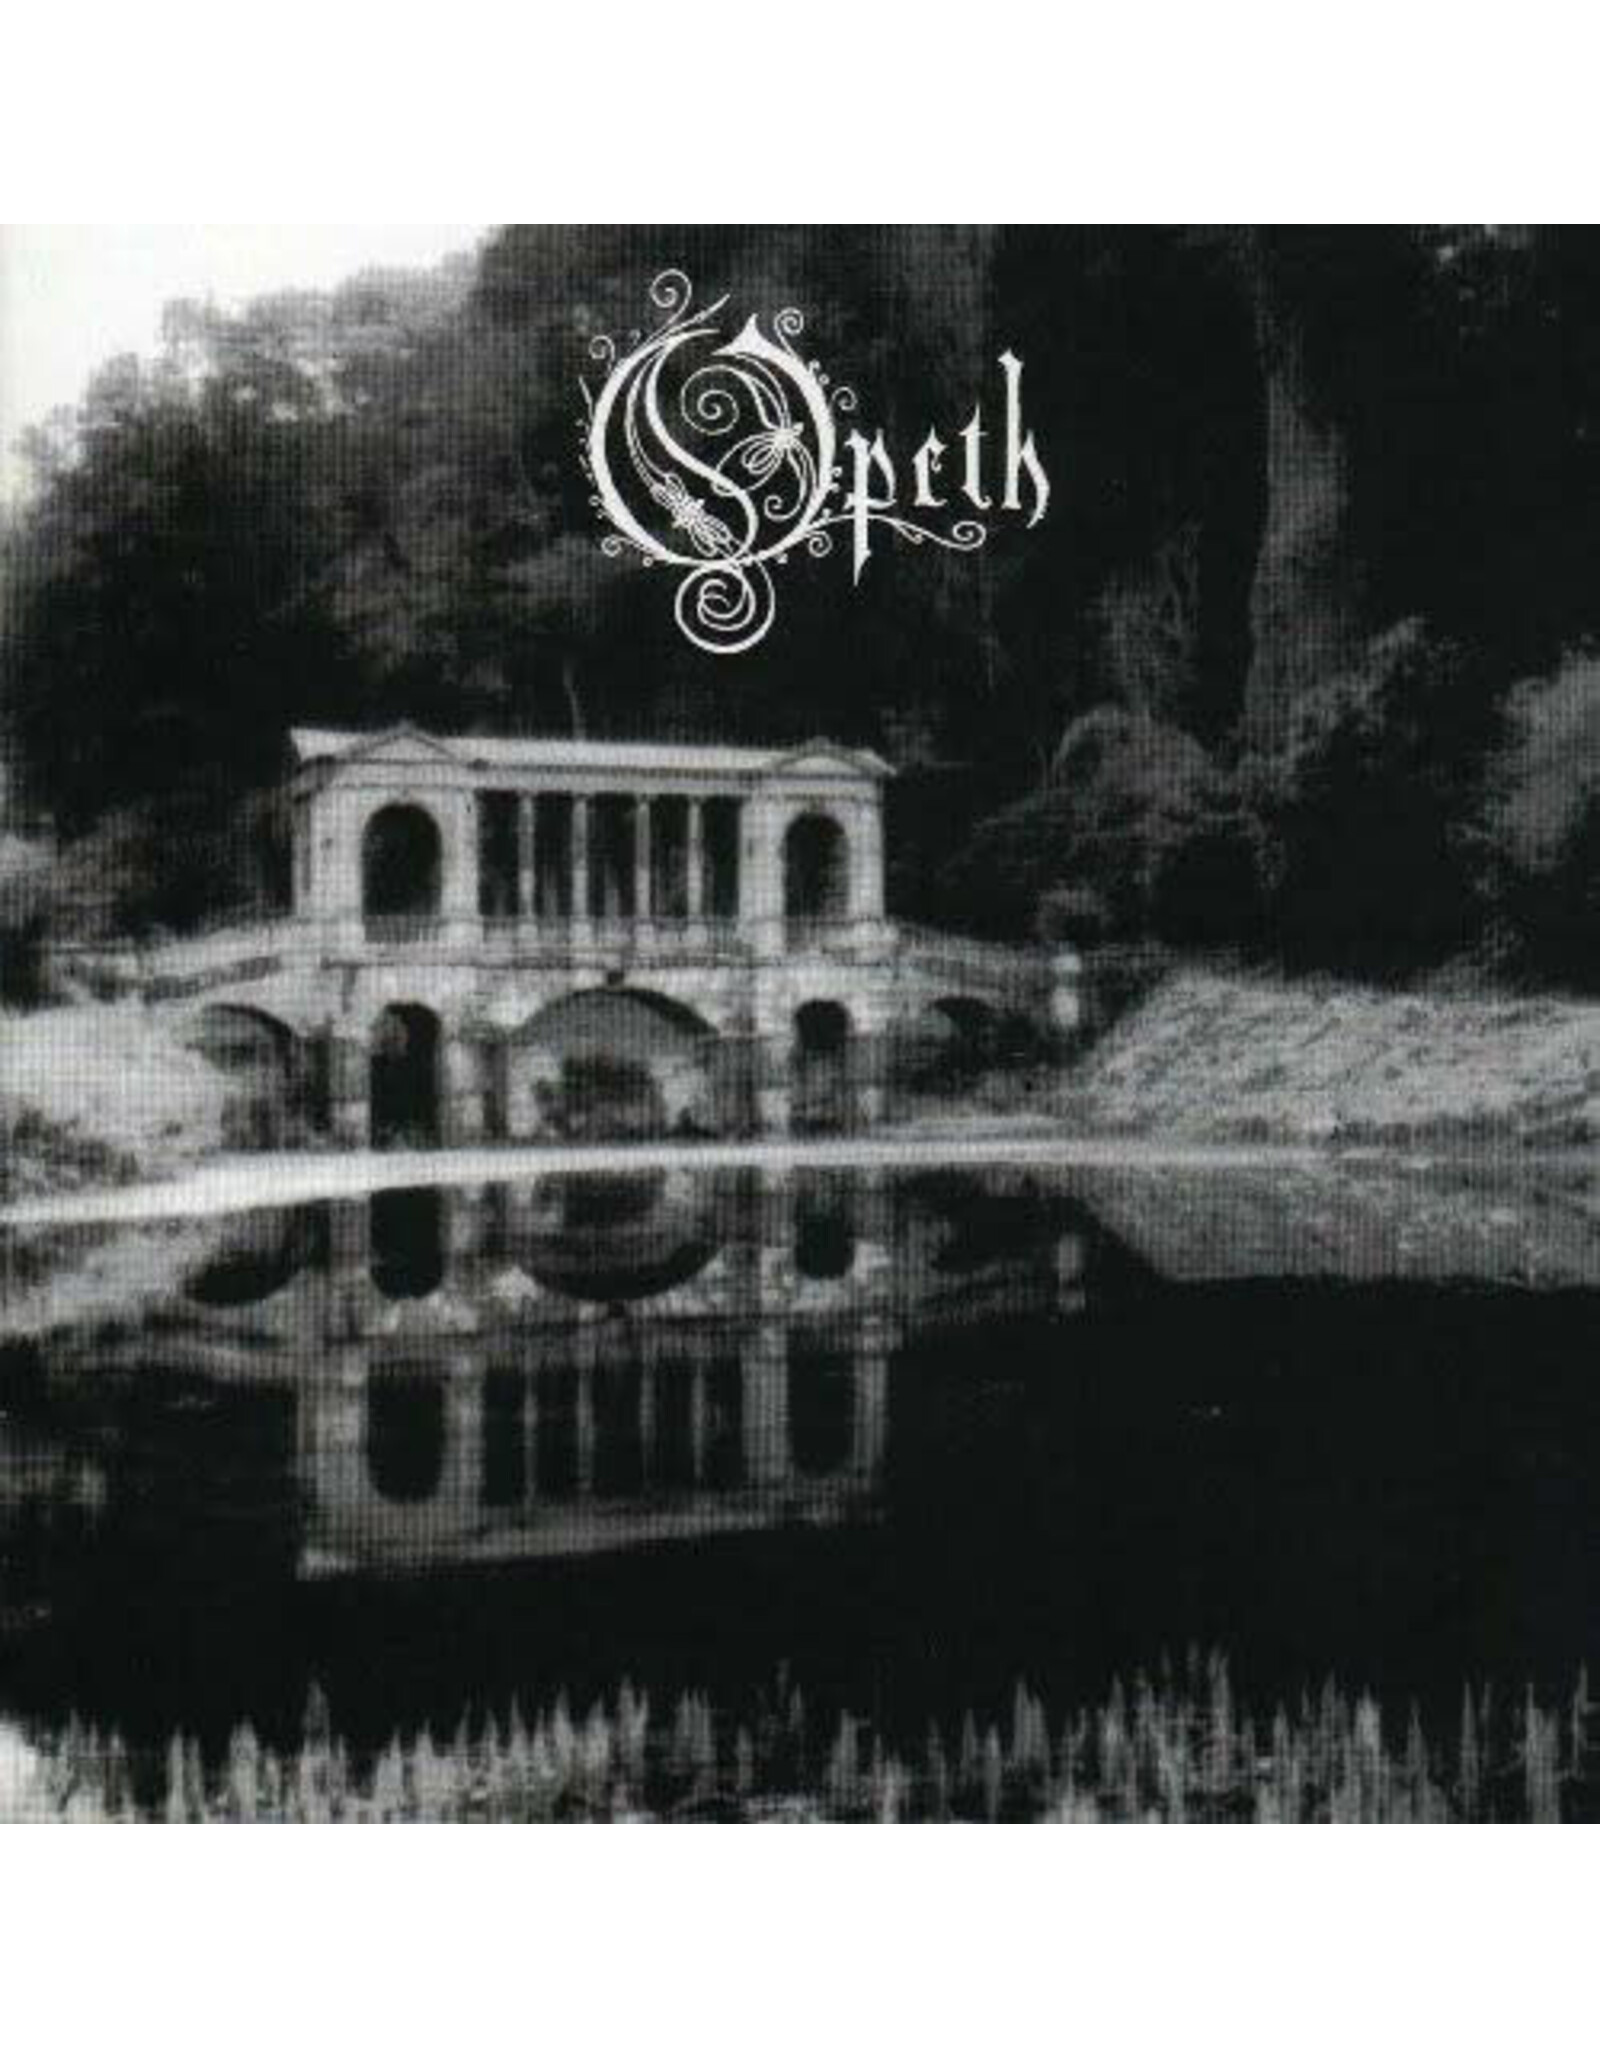 Candlelight Opeth: Morningrise (green) LP